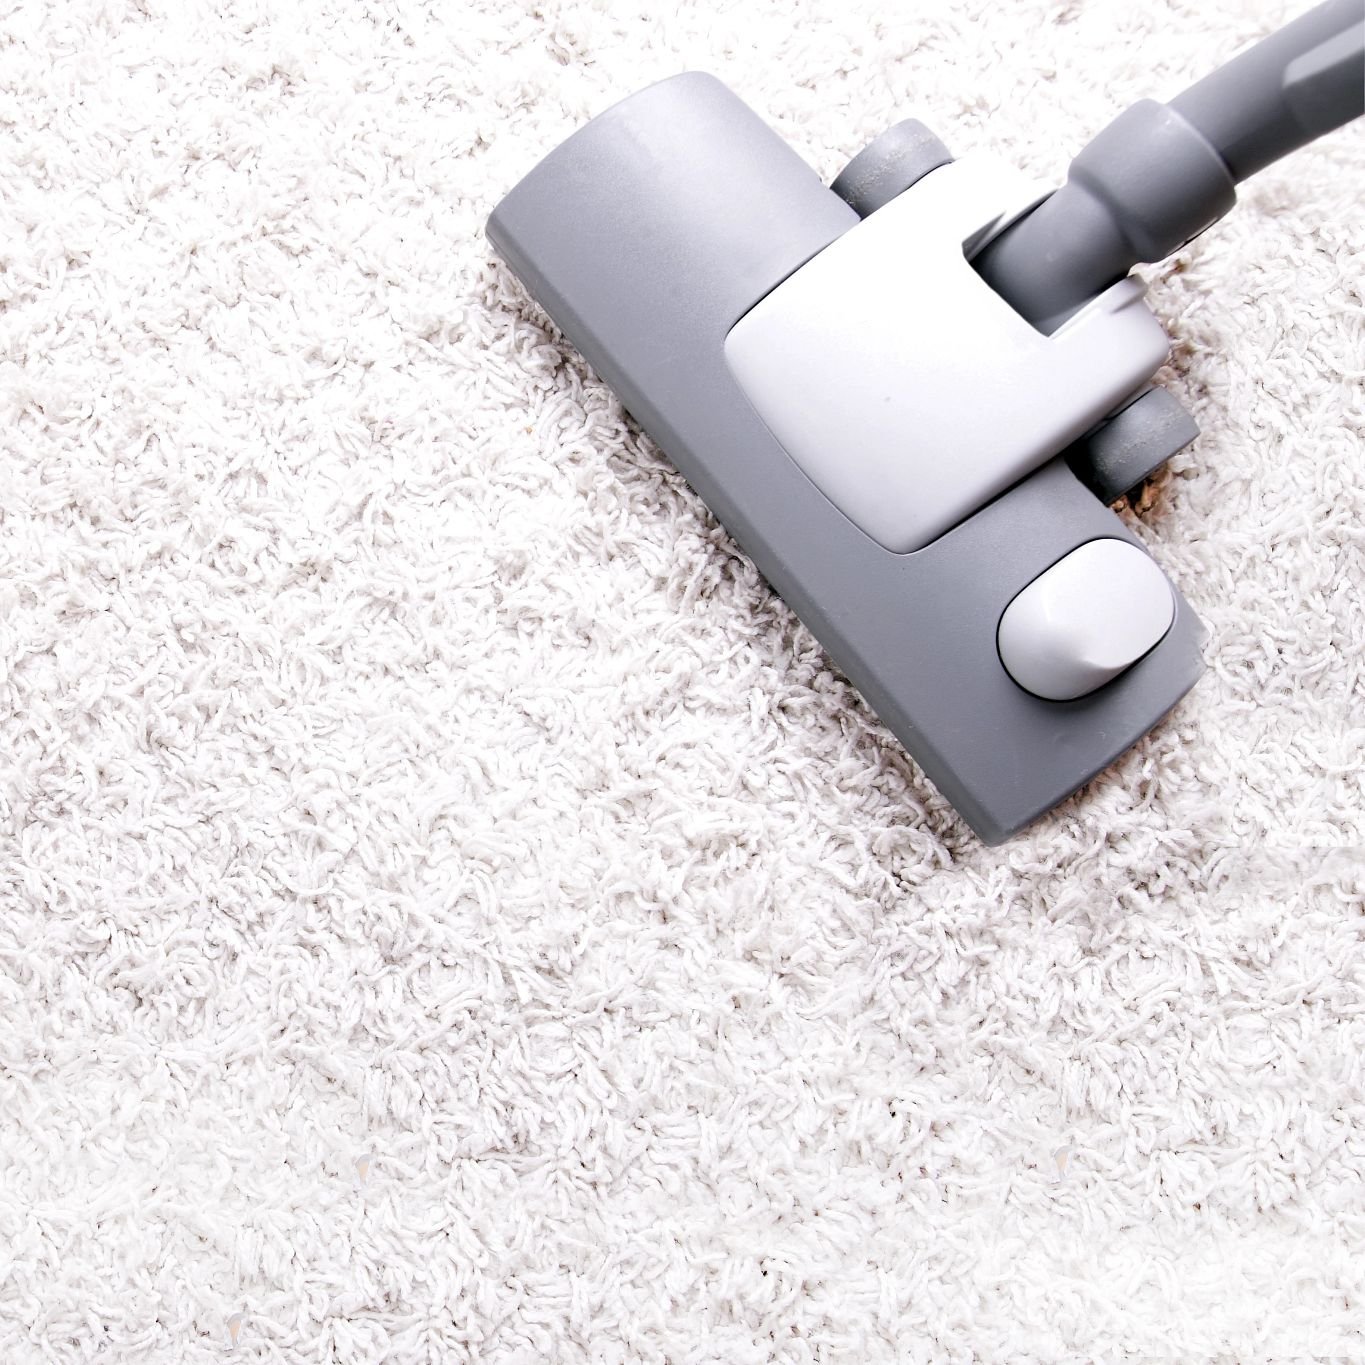 vacuum on carpet - House of Carpets Inc. in North Chesterfield